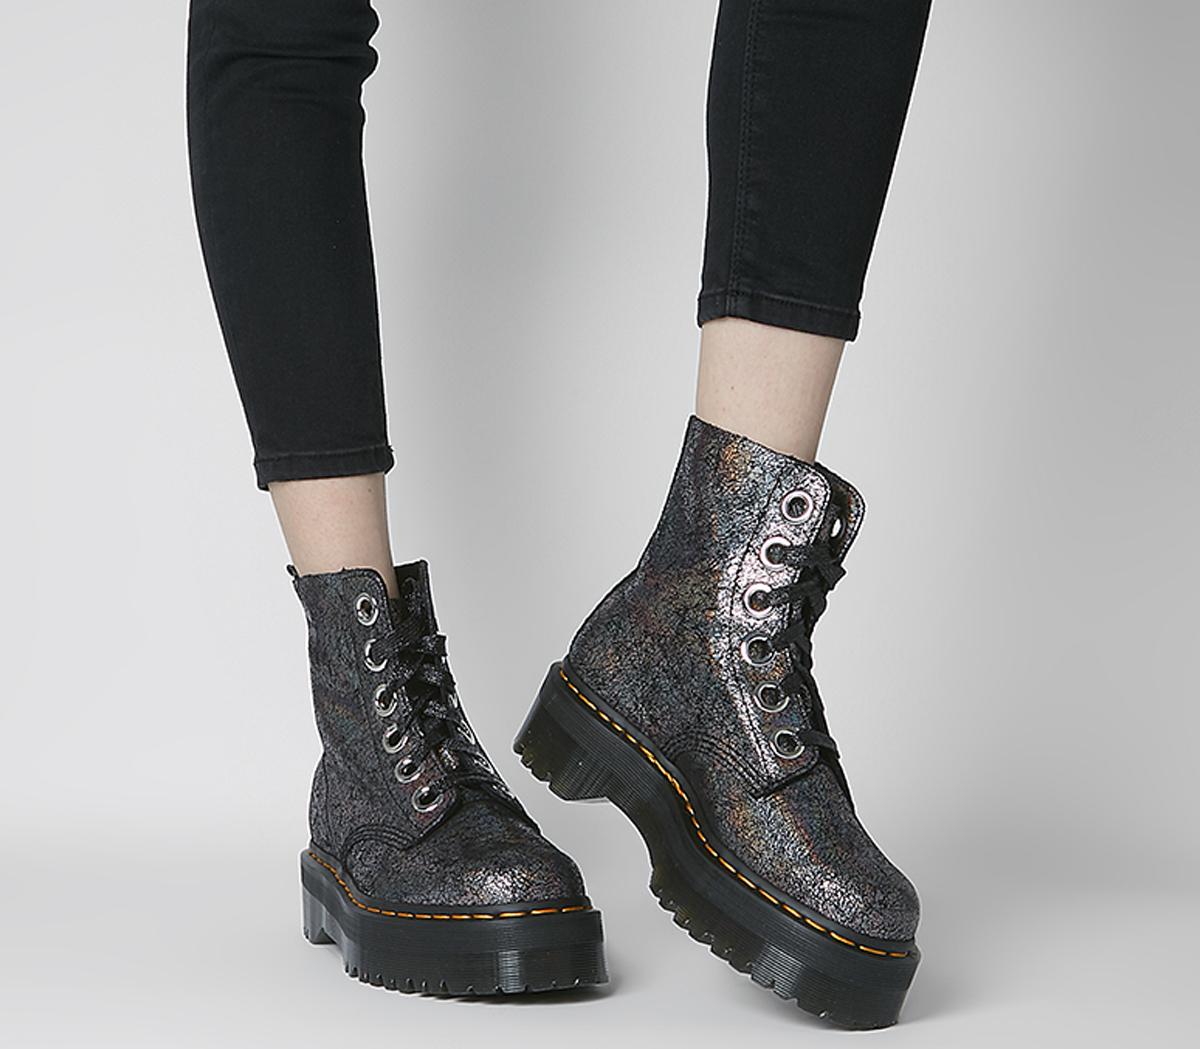 Dr Martens Molly Boots Gunmetal Grey Cracked Iridescent Ankle Boots